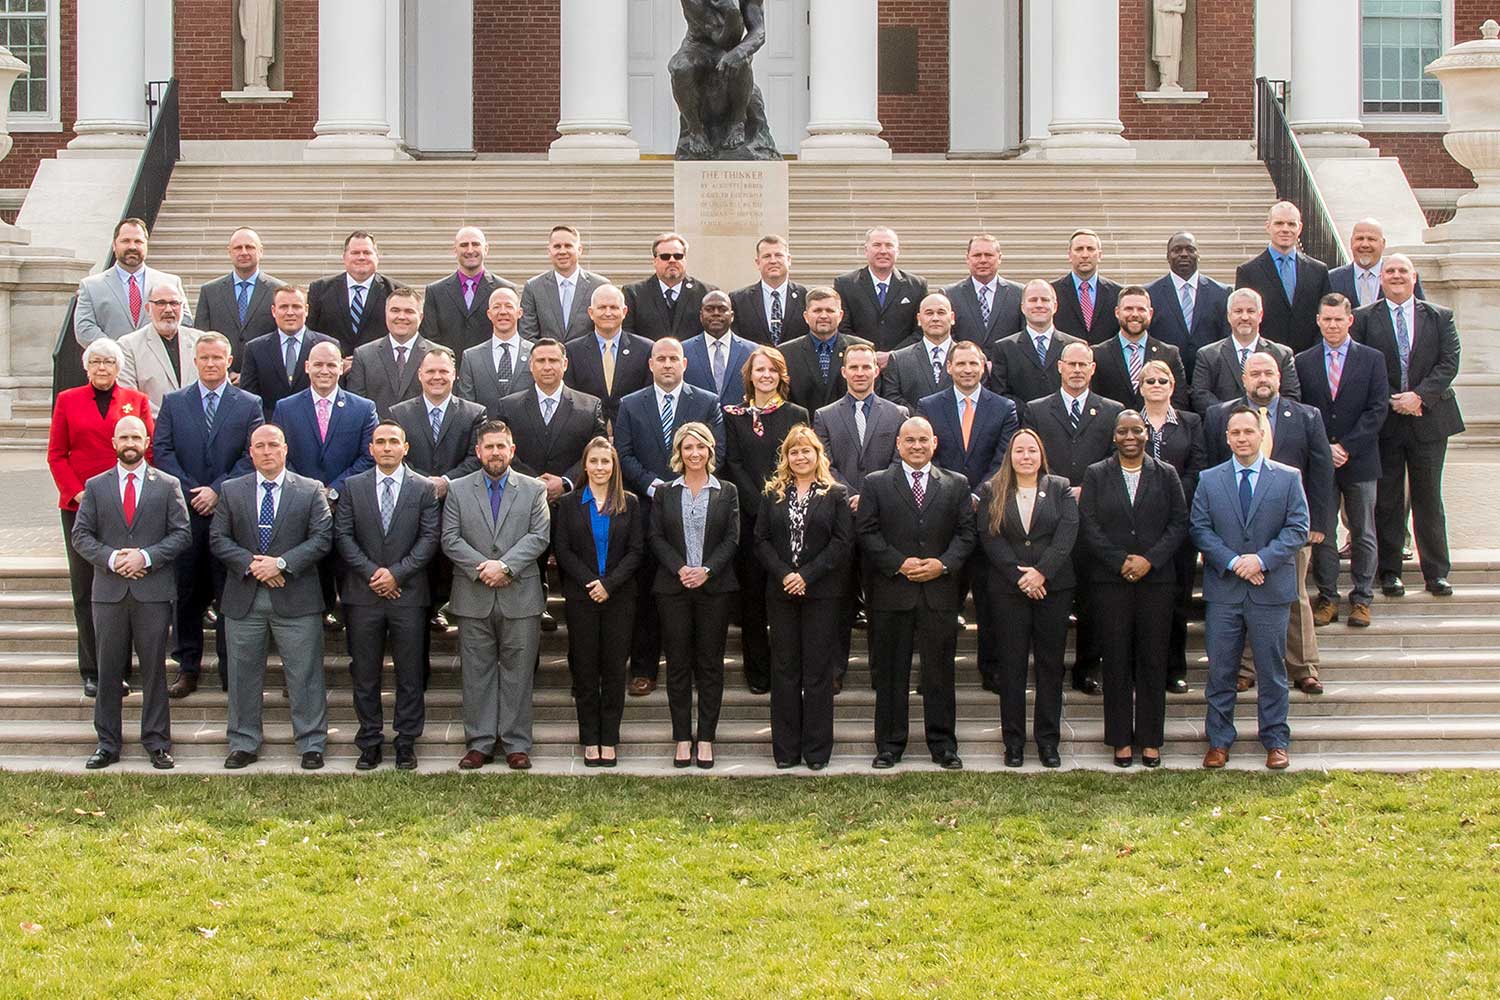 Southern Police Institute Graduates 45 From Administrative Officers Course Kentucky Law Enforcement Council